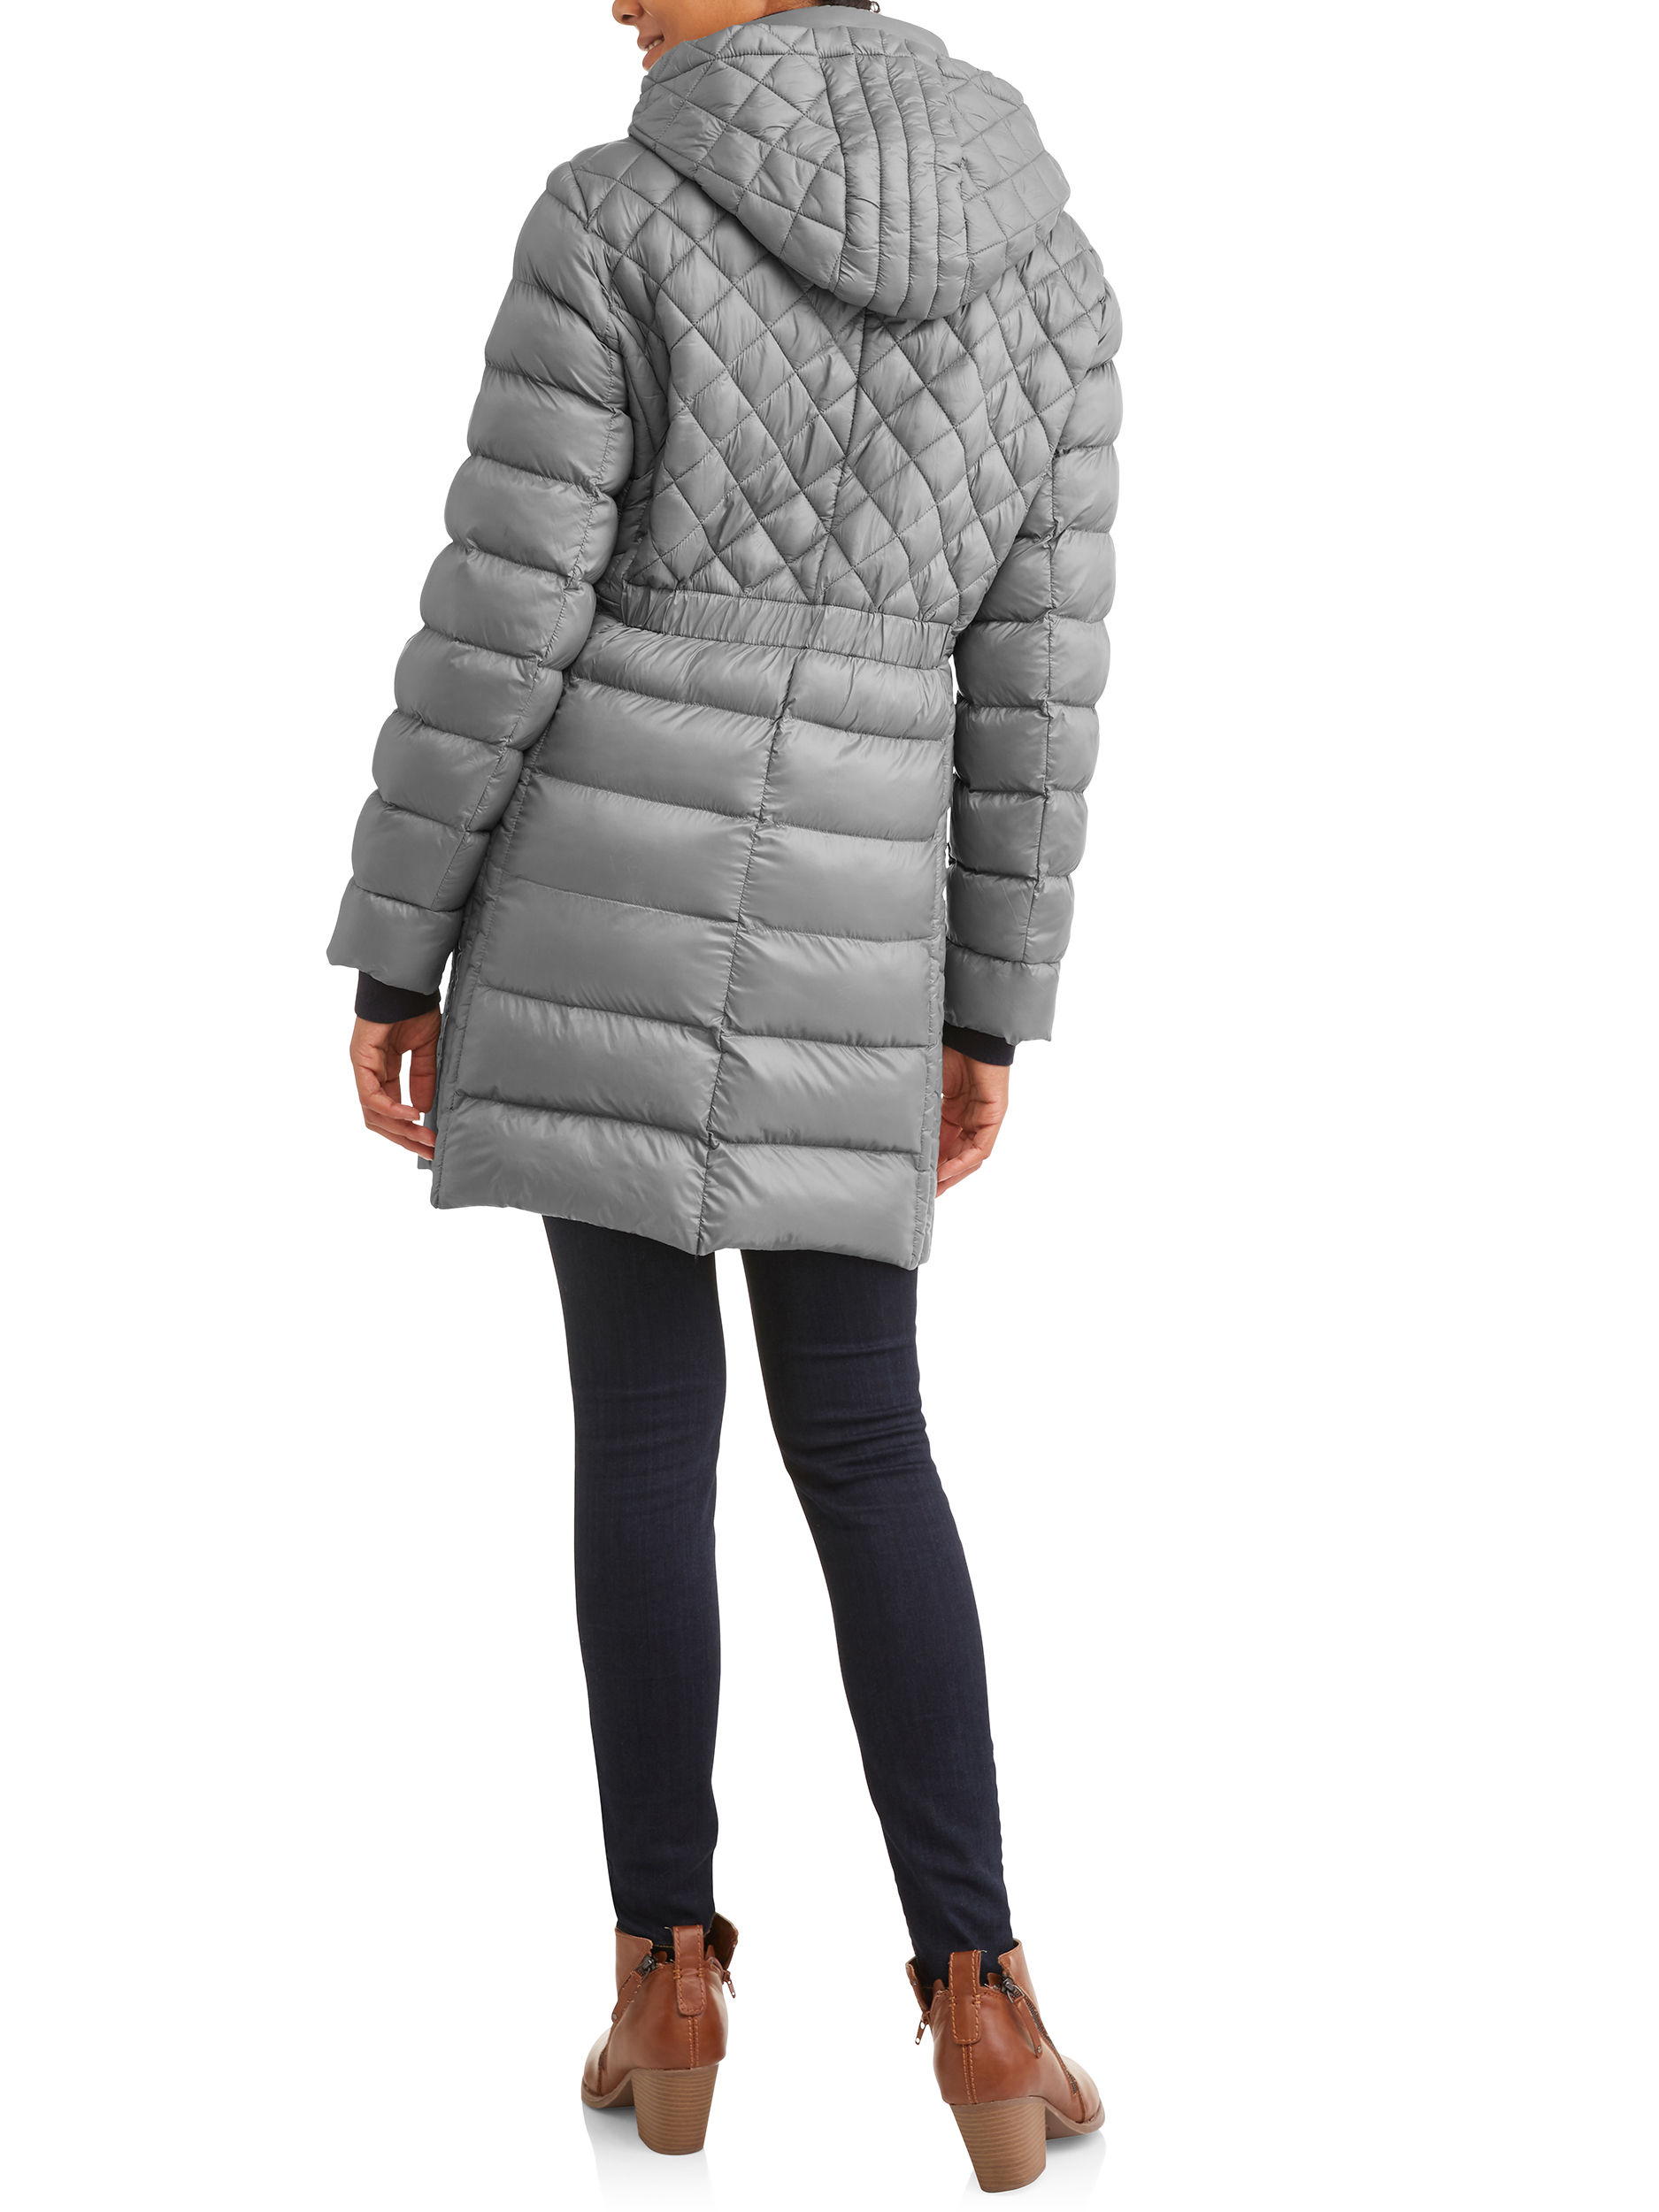 30 First Women's Quilted Puffer Jacket - image 2 of 4